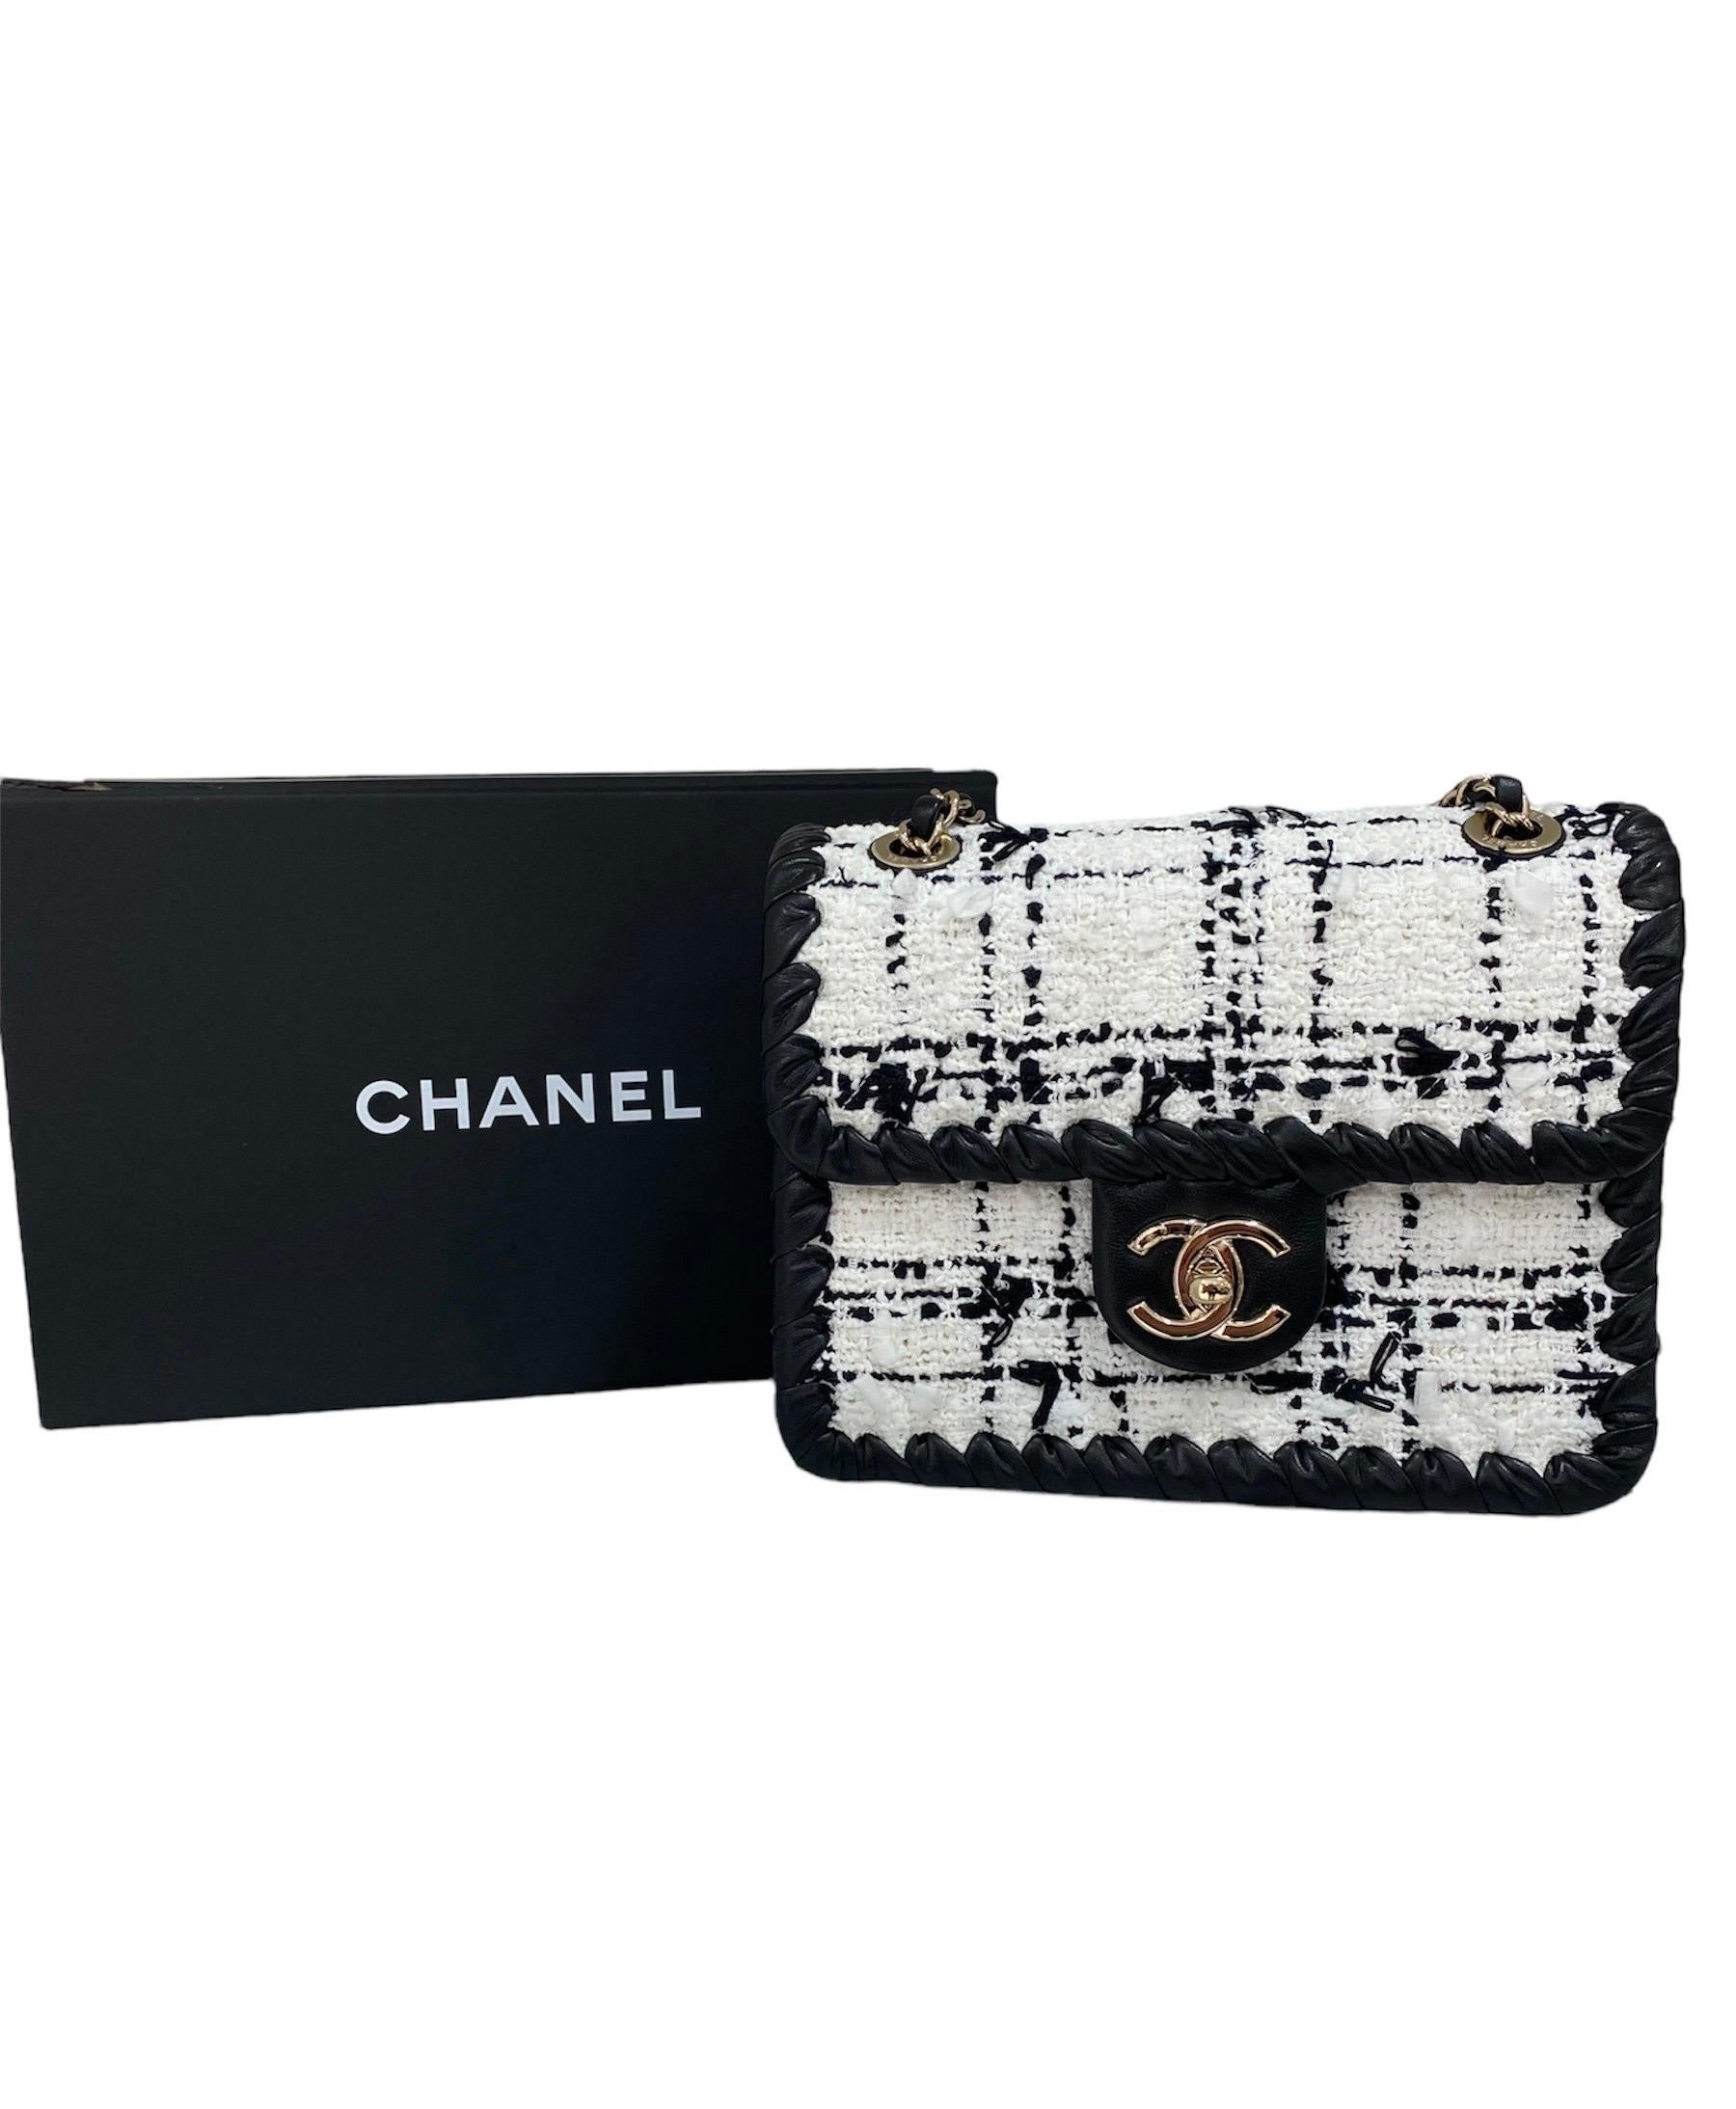 Chanel signed bag, Mini Flap model, made of black and white tweed with black leather inserts and silver hardware.

Equipped with a flap with CC logo closure, internally lined in black fabric, roomy for the essentials.

Equipped with a sliding